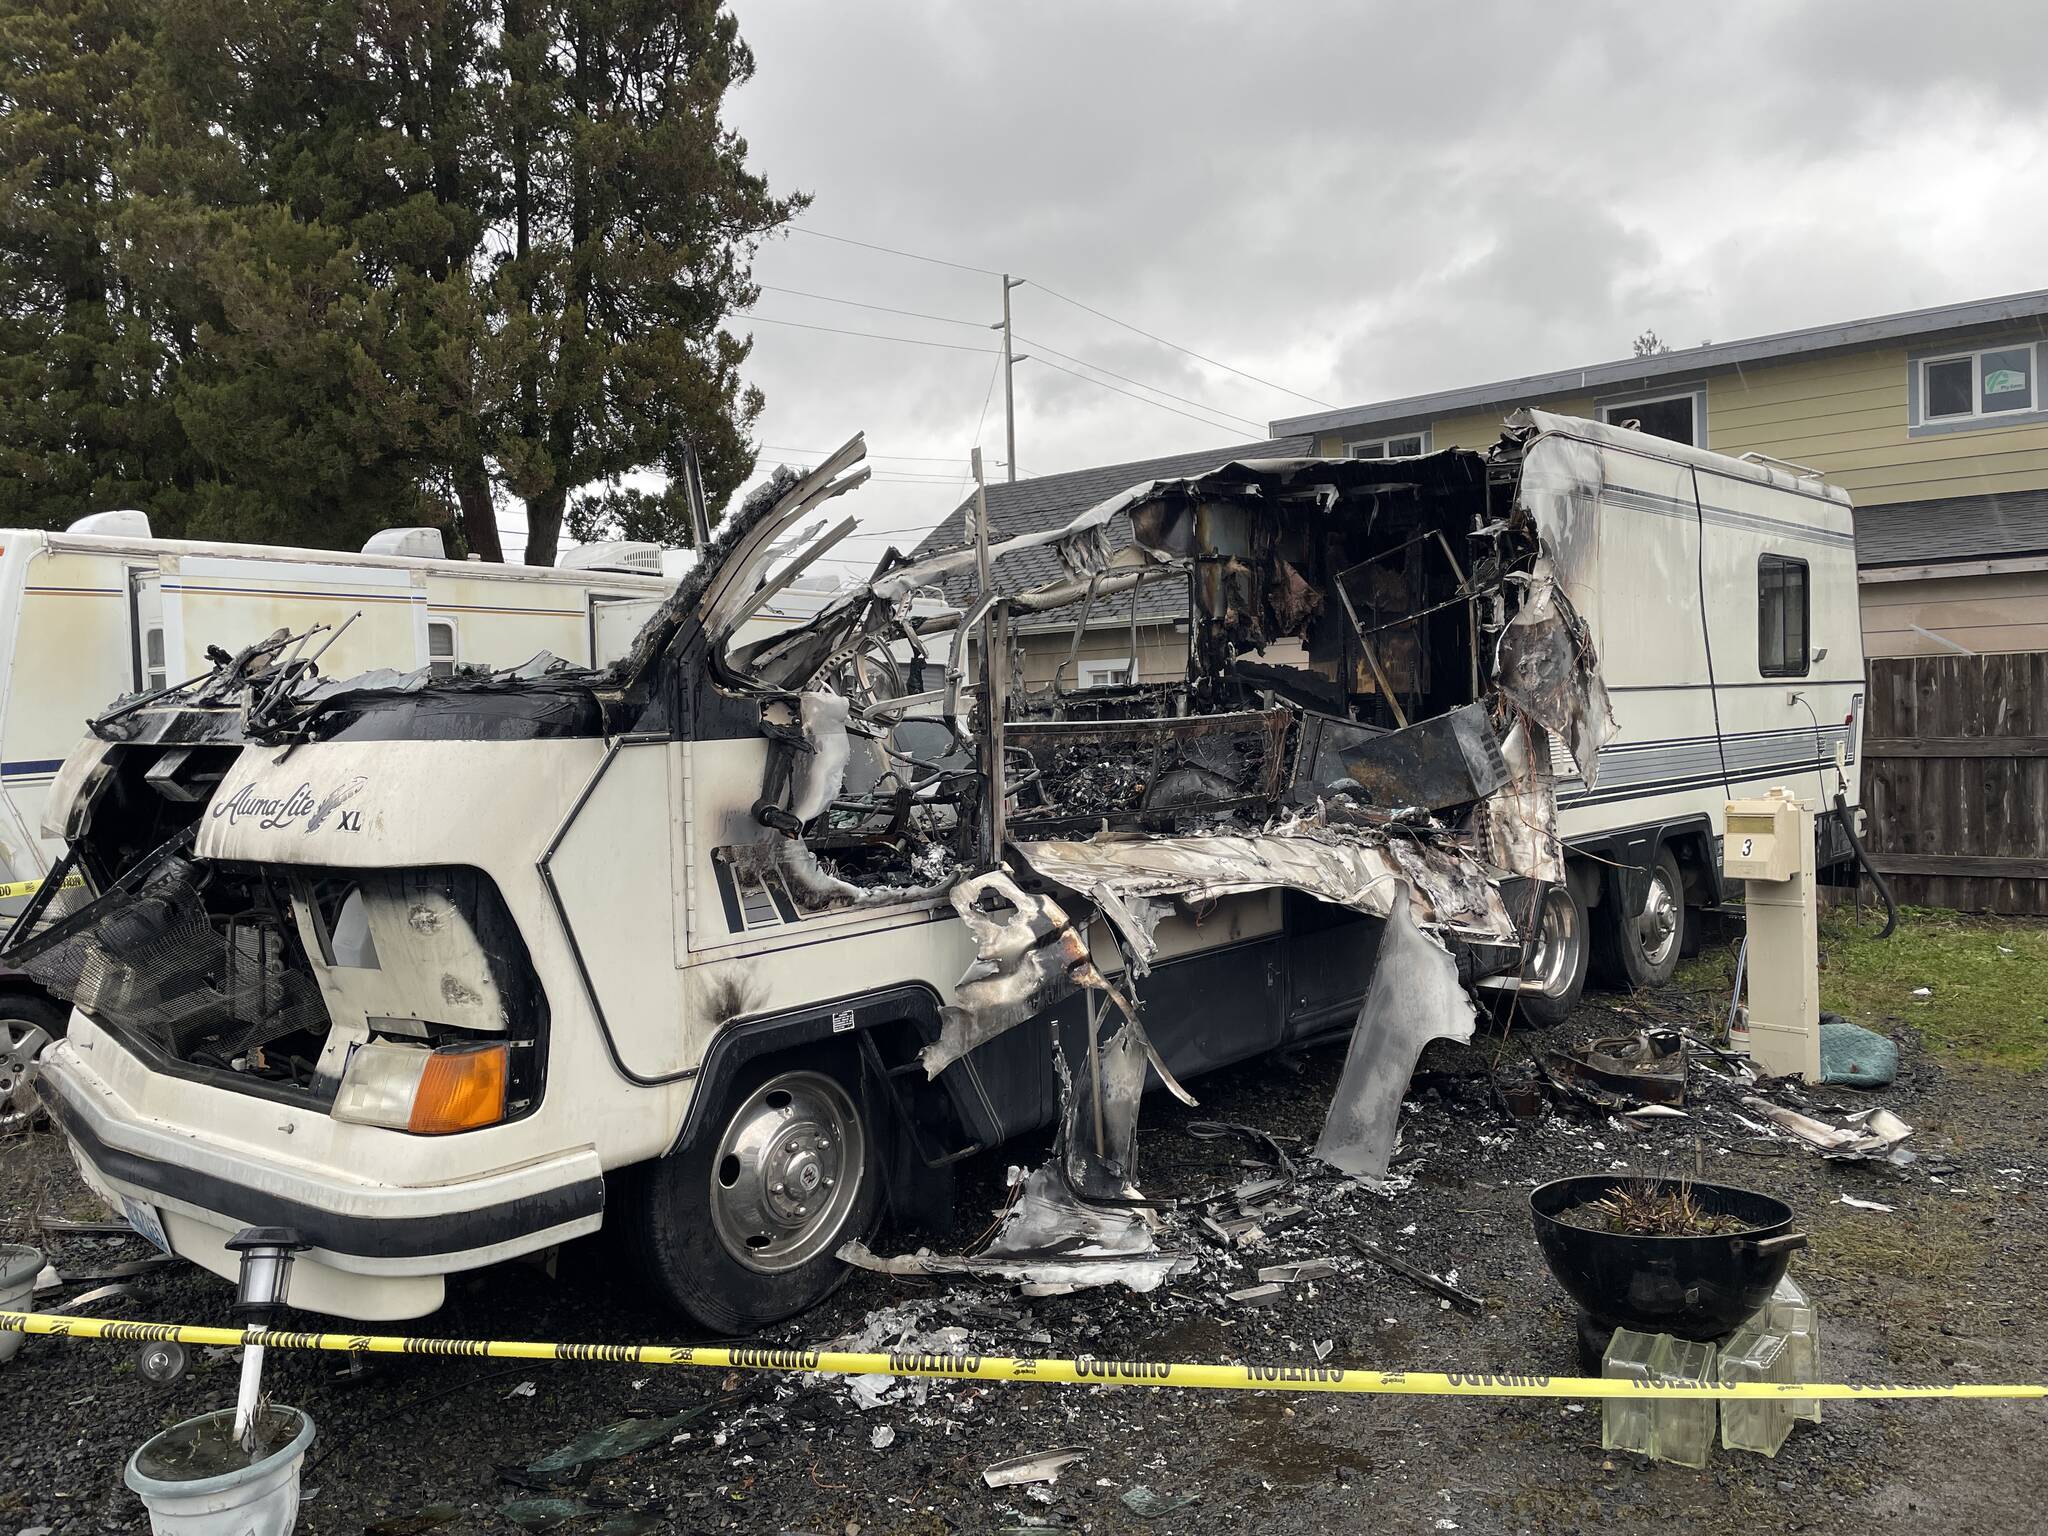 A fire on Jan. 8 that destroyed an RV at a Hoquiam motor home park killed the resident, a 91-year-old man. (Michael S. Lockett / The Daily World)